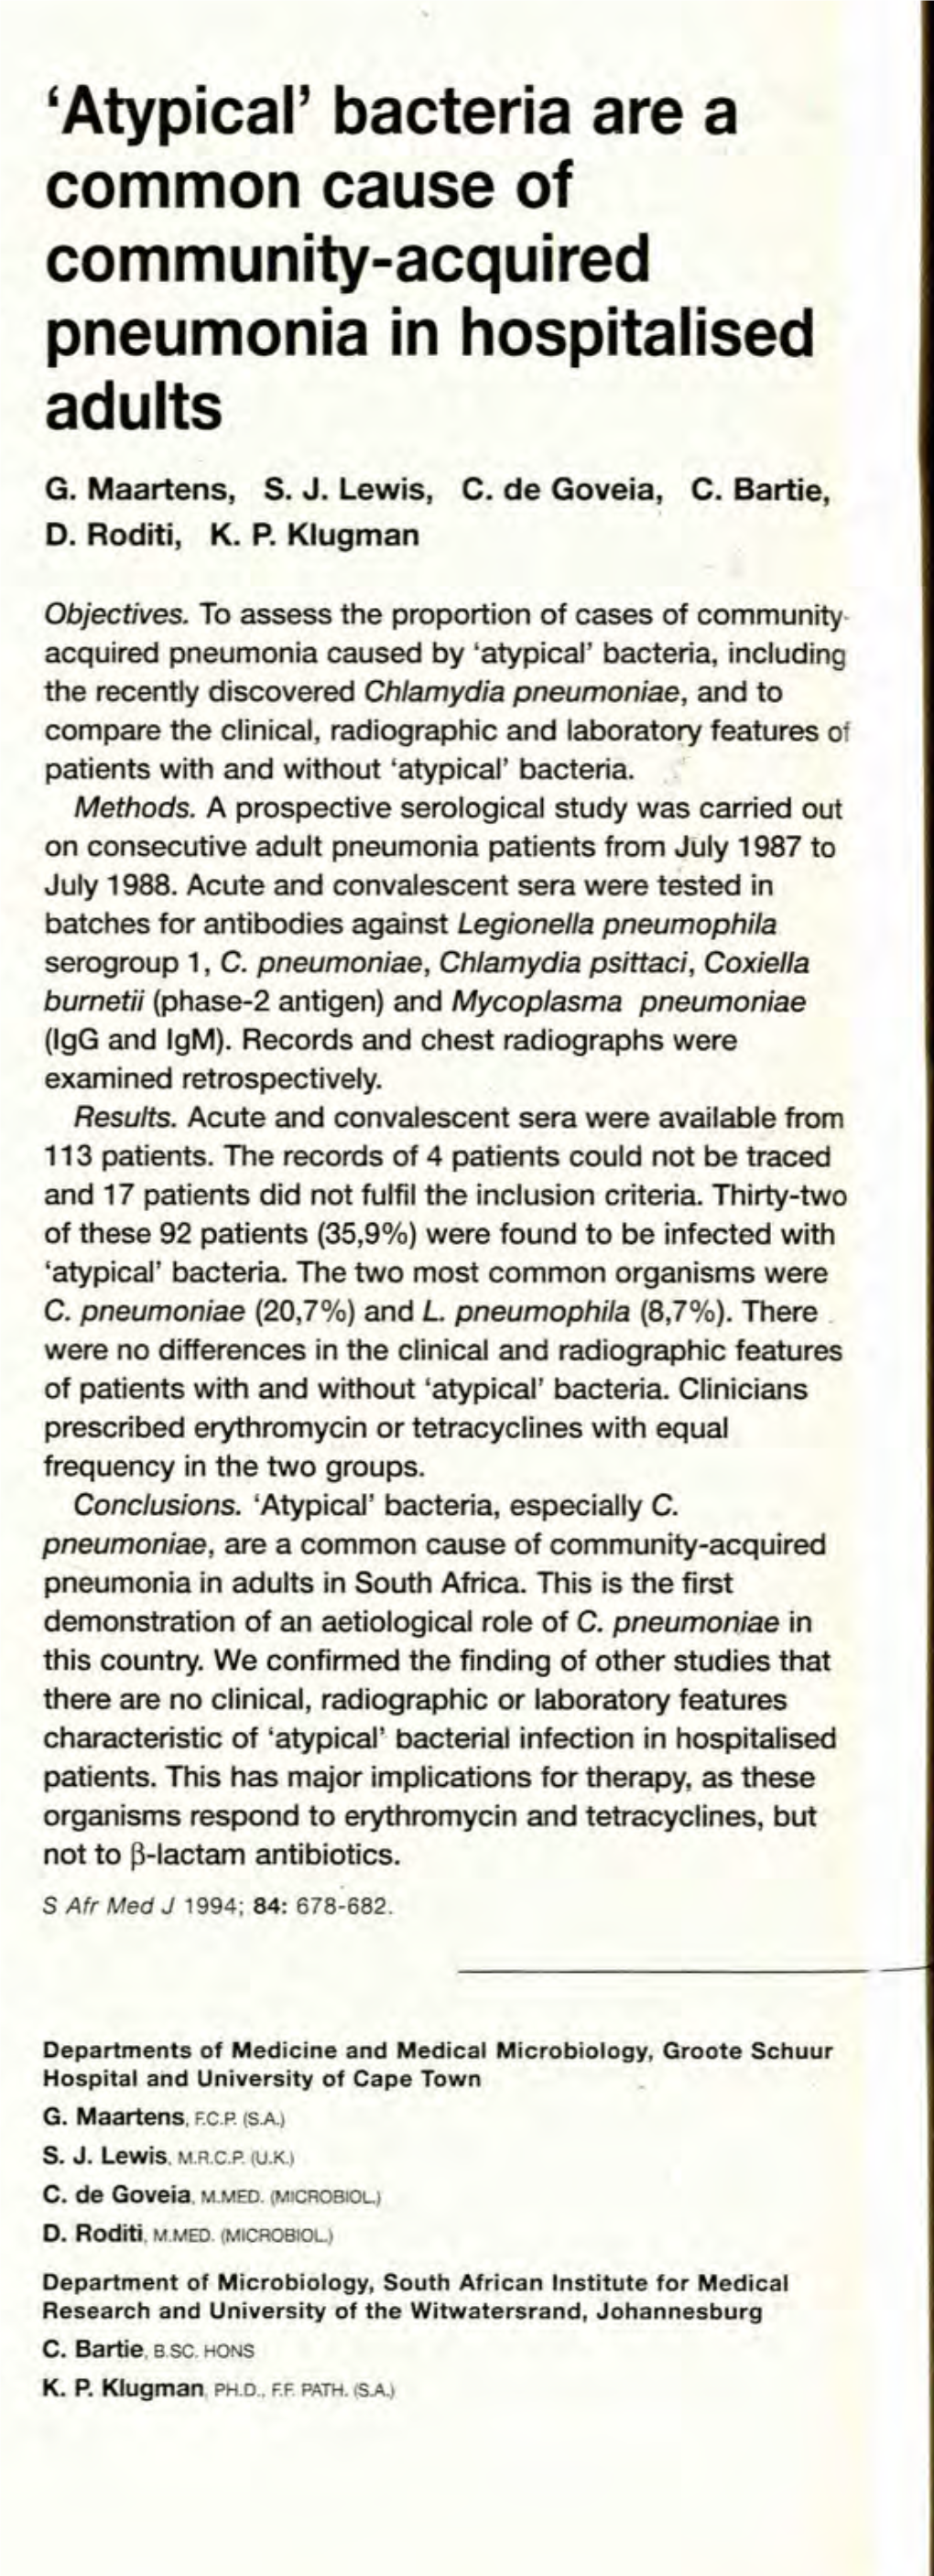 'Atypical' Bacteria Are a Common Cause of Community-Acquired